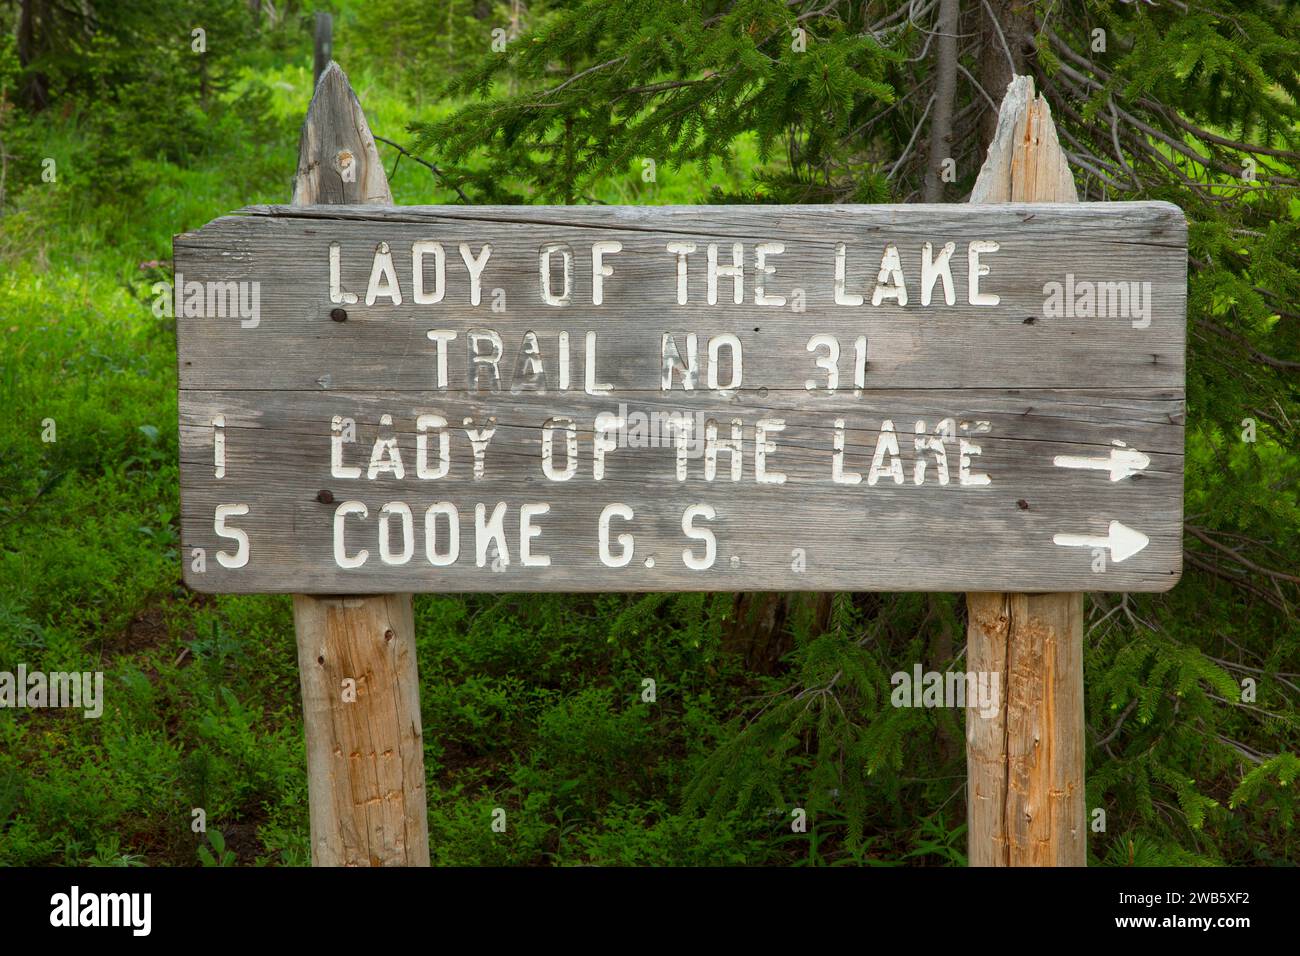 Lady of the Lake Trail sign, Gallatin National Forest, Montana Stock Photo